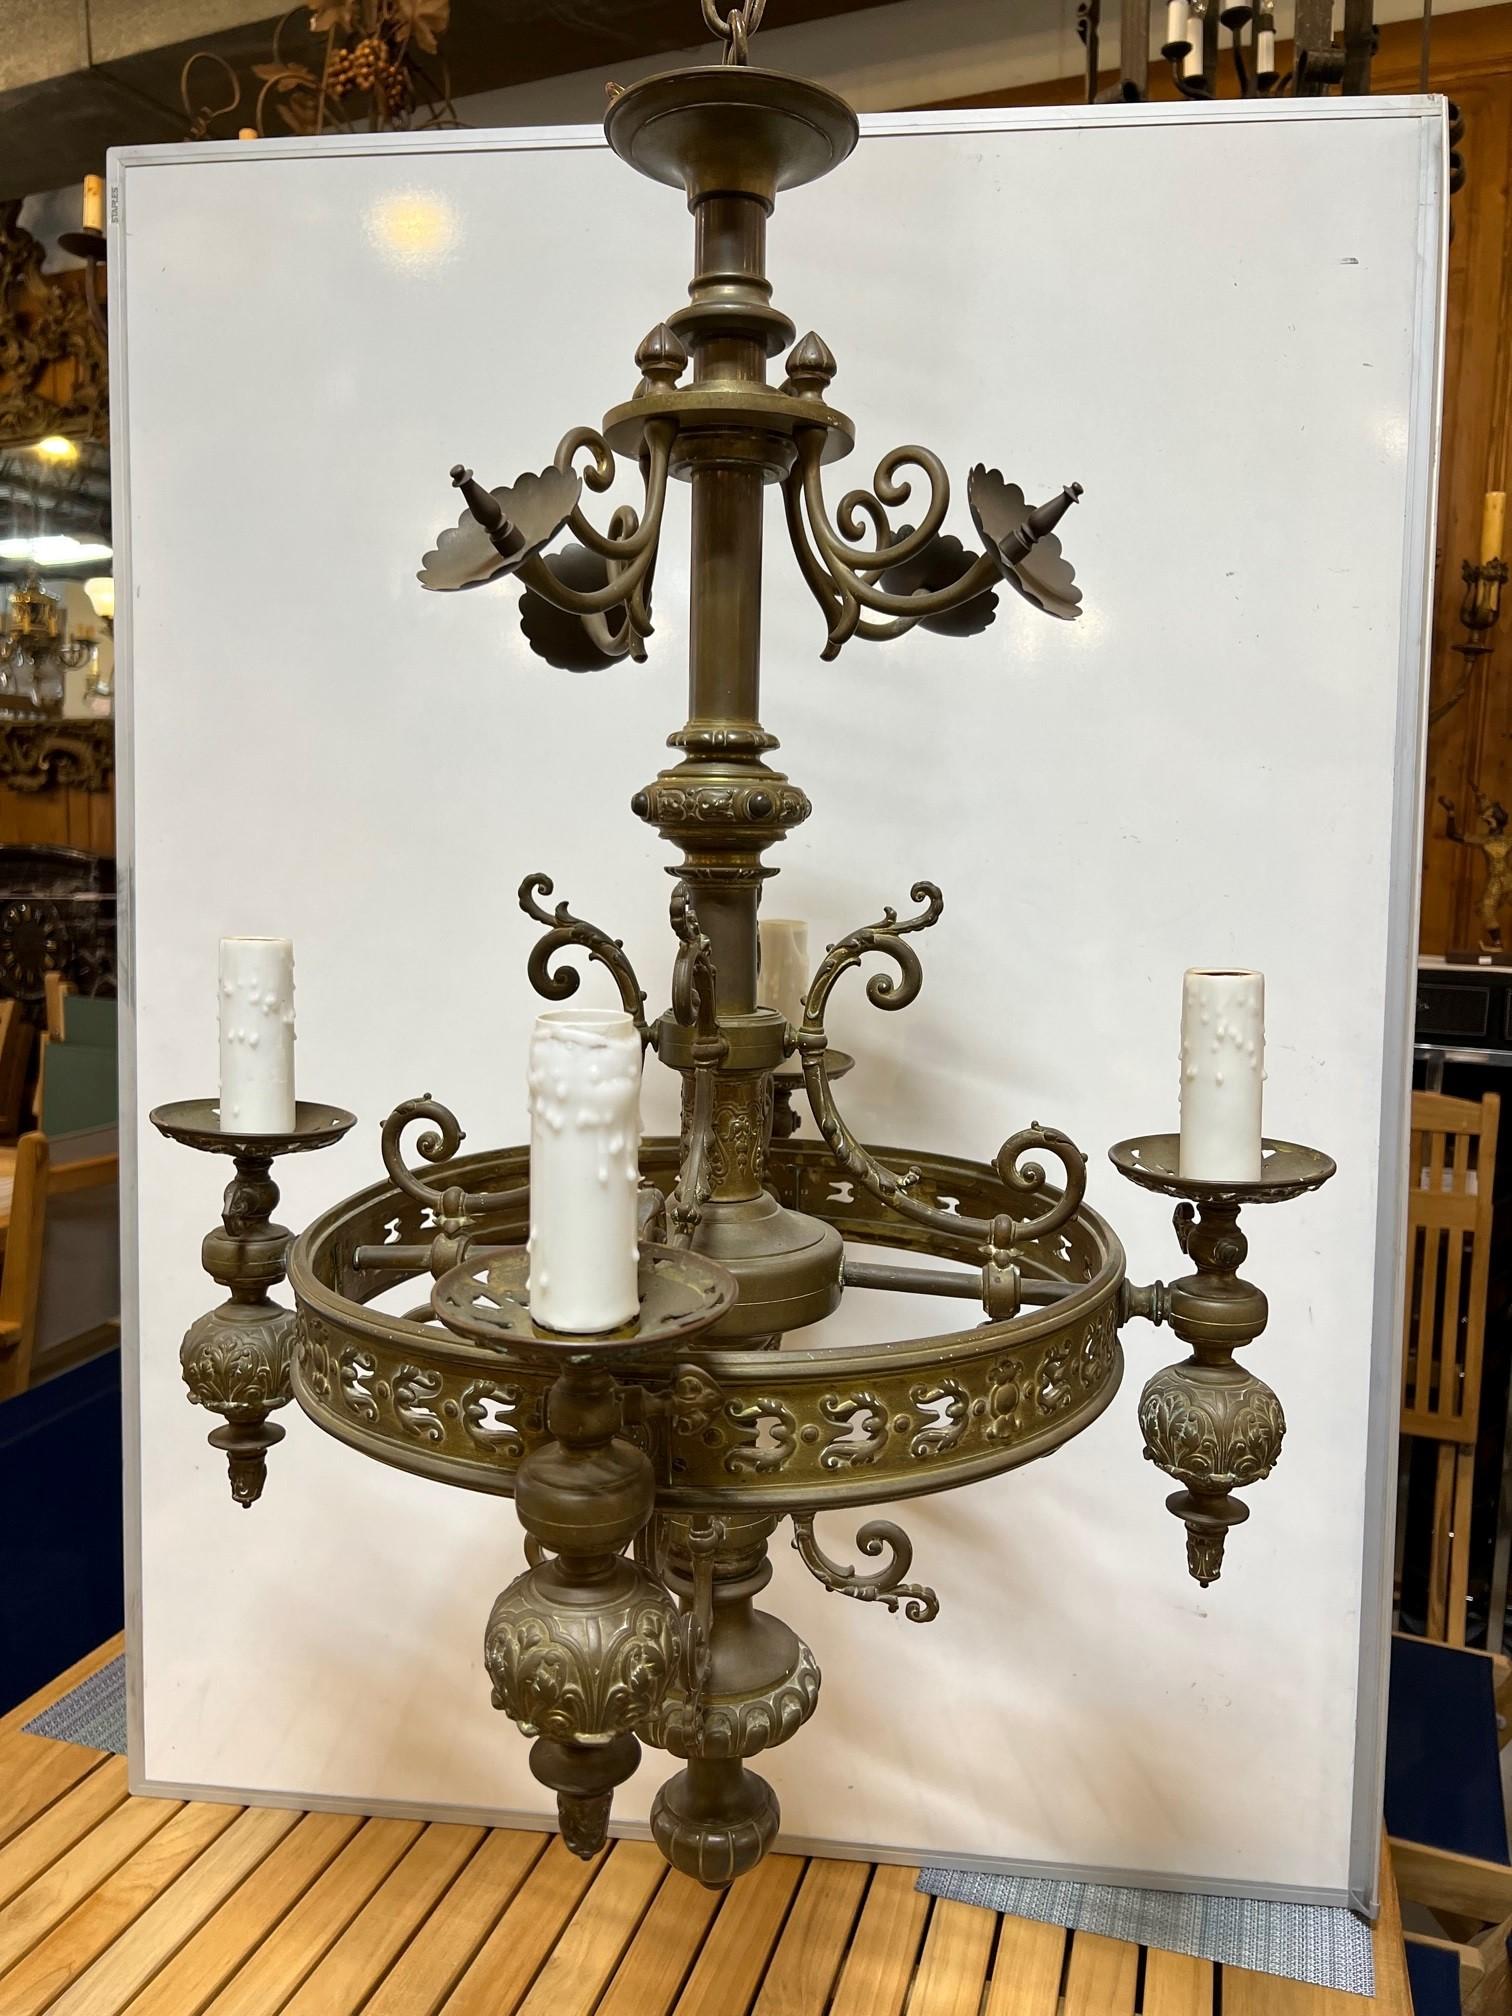 Mid-19th century antique gas four arm bronze chandelier which has been recently electrified circa 1860. This is a nice converted gas chandelier with a lot of bronze filigree and beautiful details. It has four arms each with a gas knob which was used